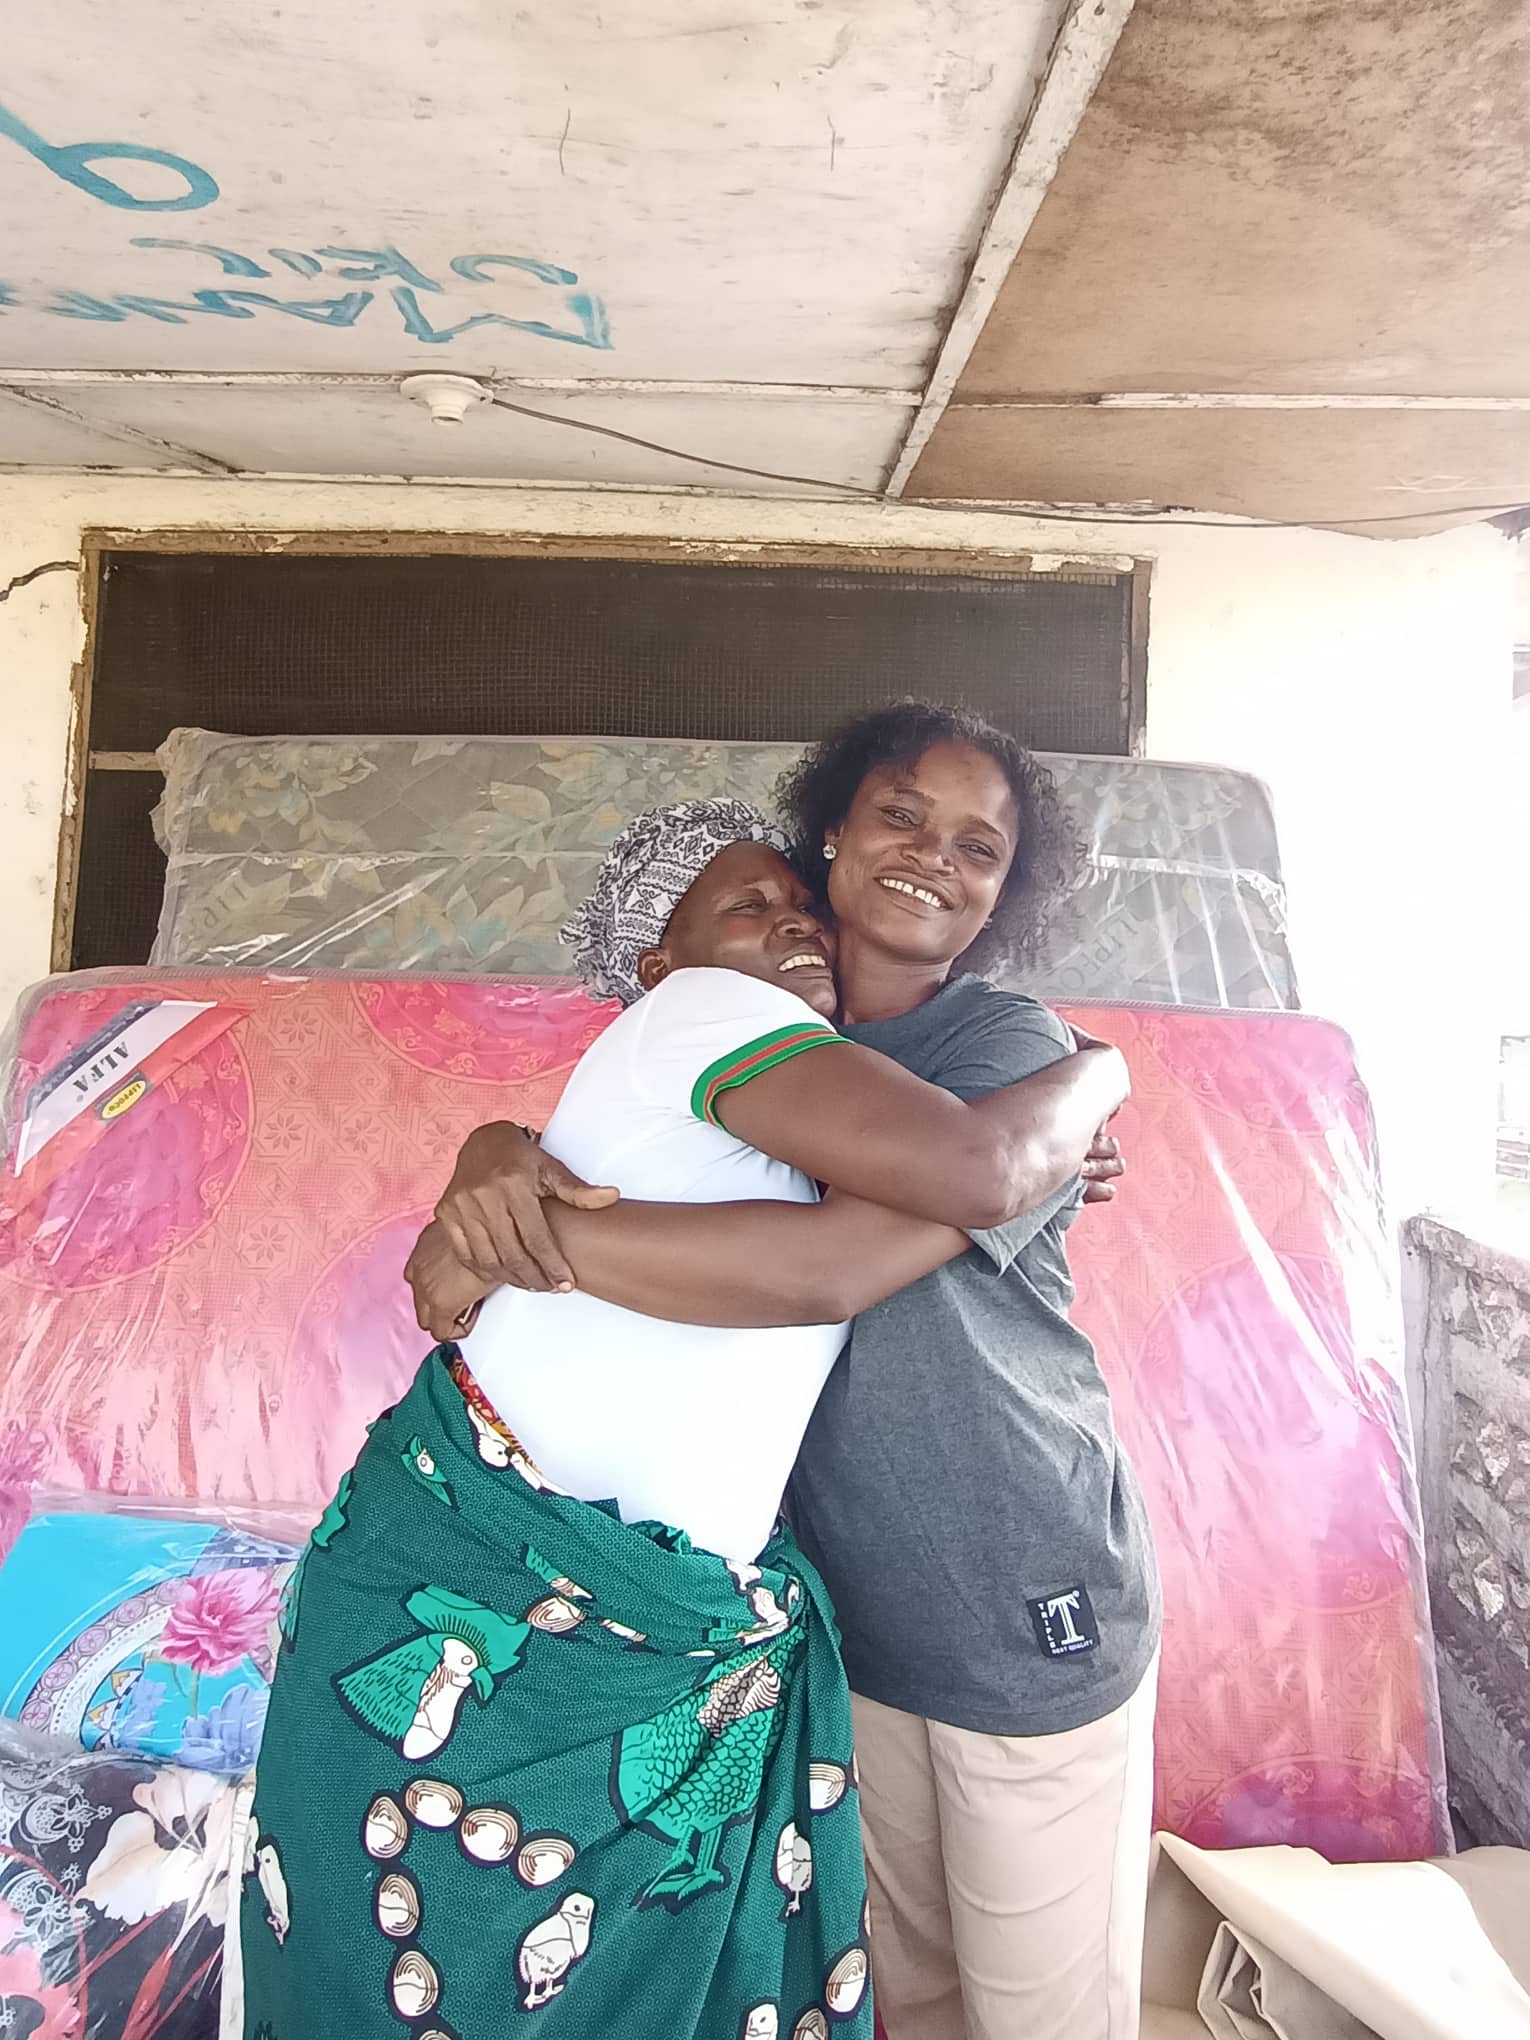 Fanny gives Bernice a big hug!  She is so thankful that Bernice connected her to Provision of Hope. 
Fanny is so grateful that she has this beautiful place and has all her children with her again.